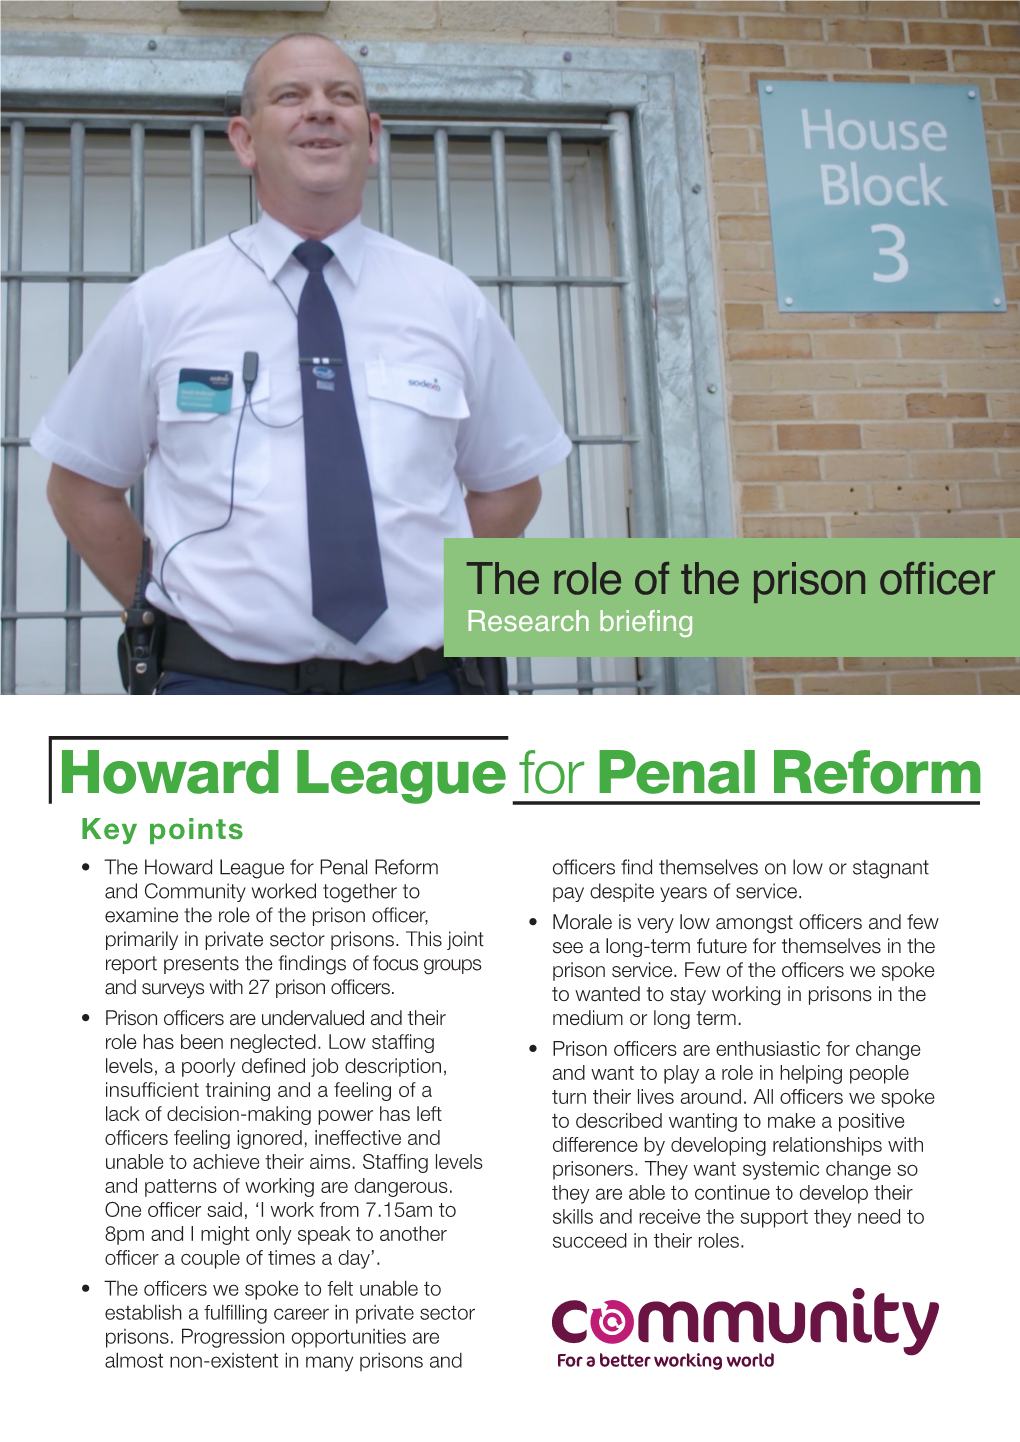 The Role of the Prison Officer Research Briefing